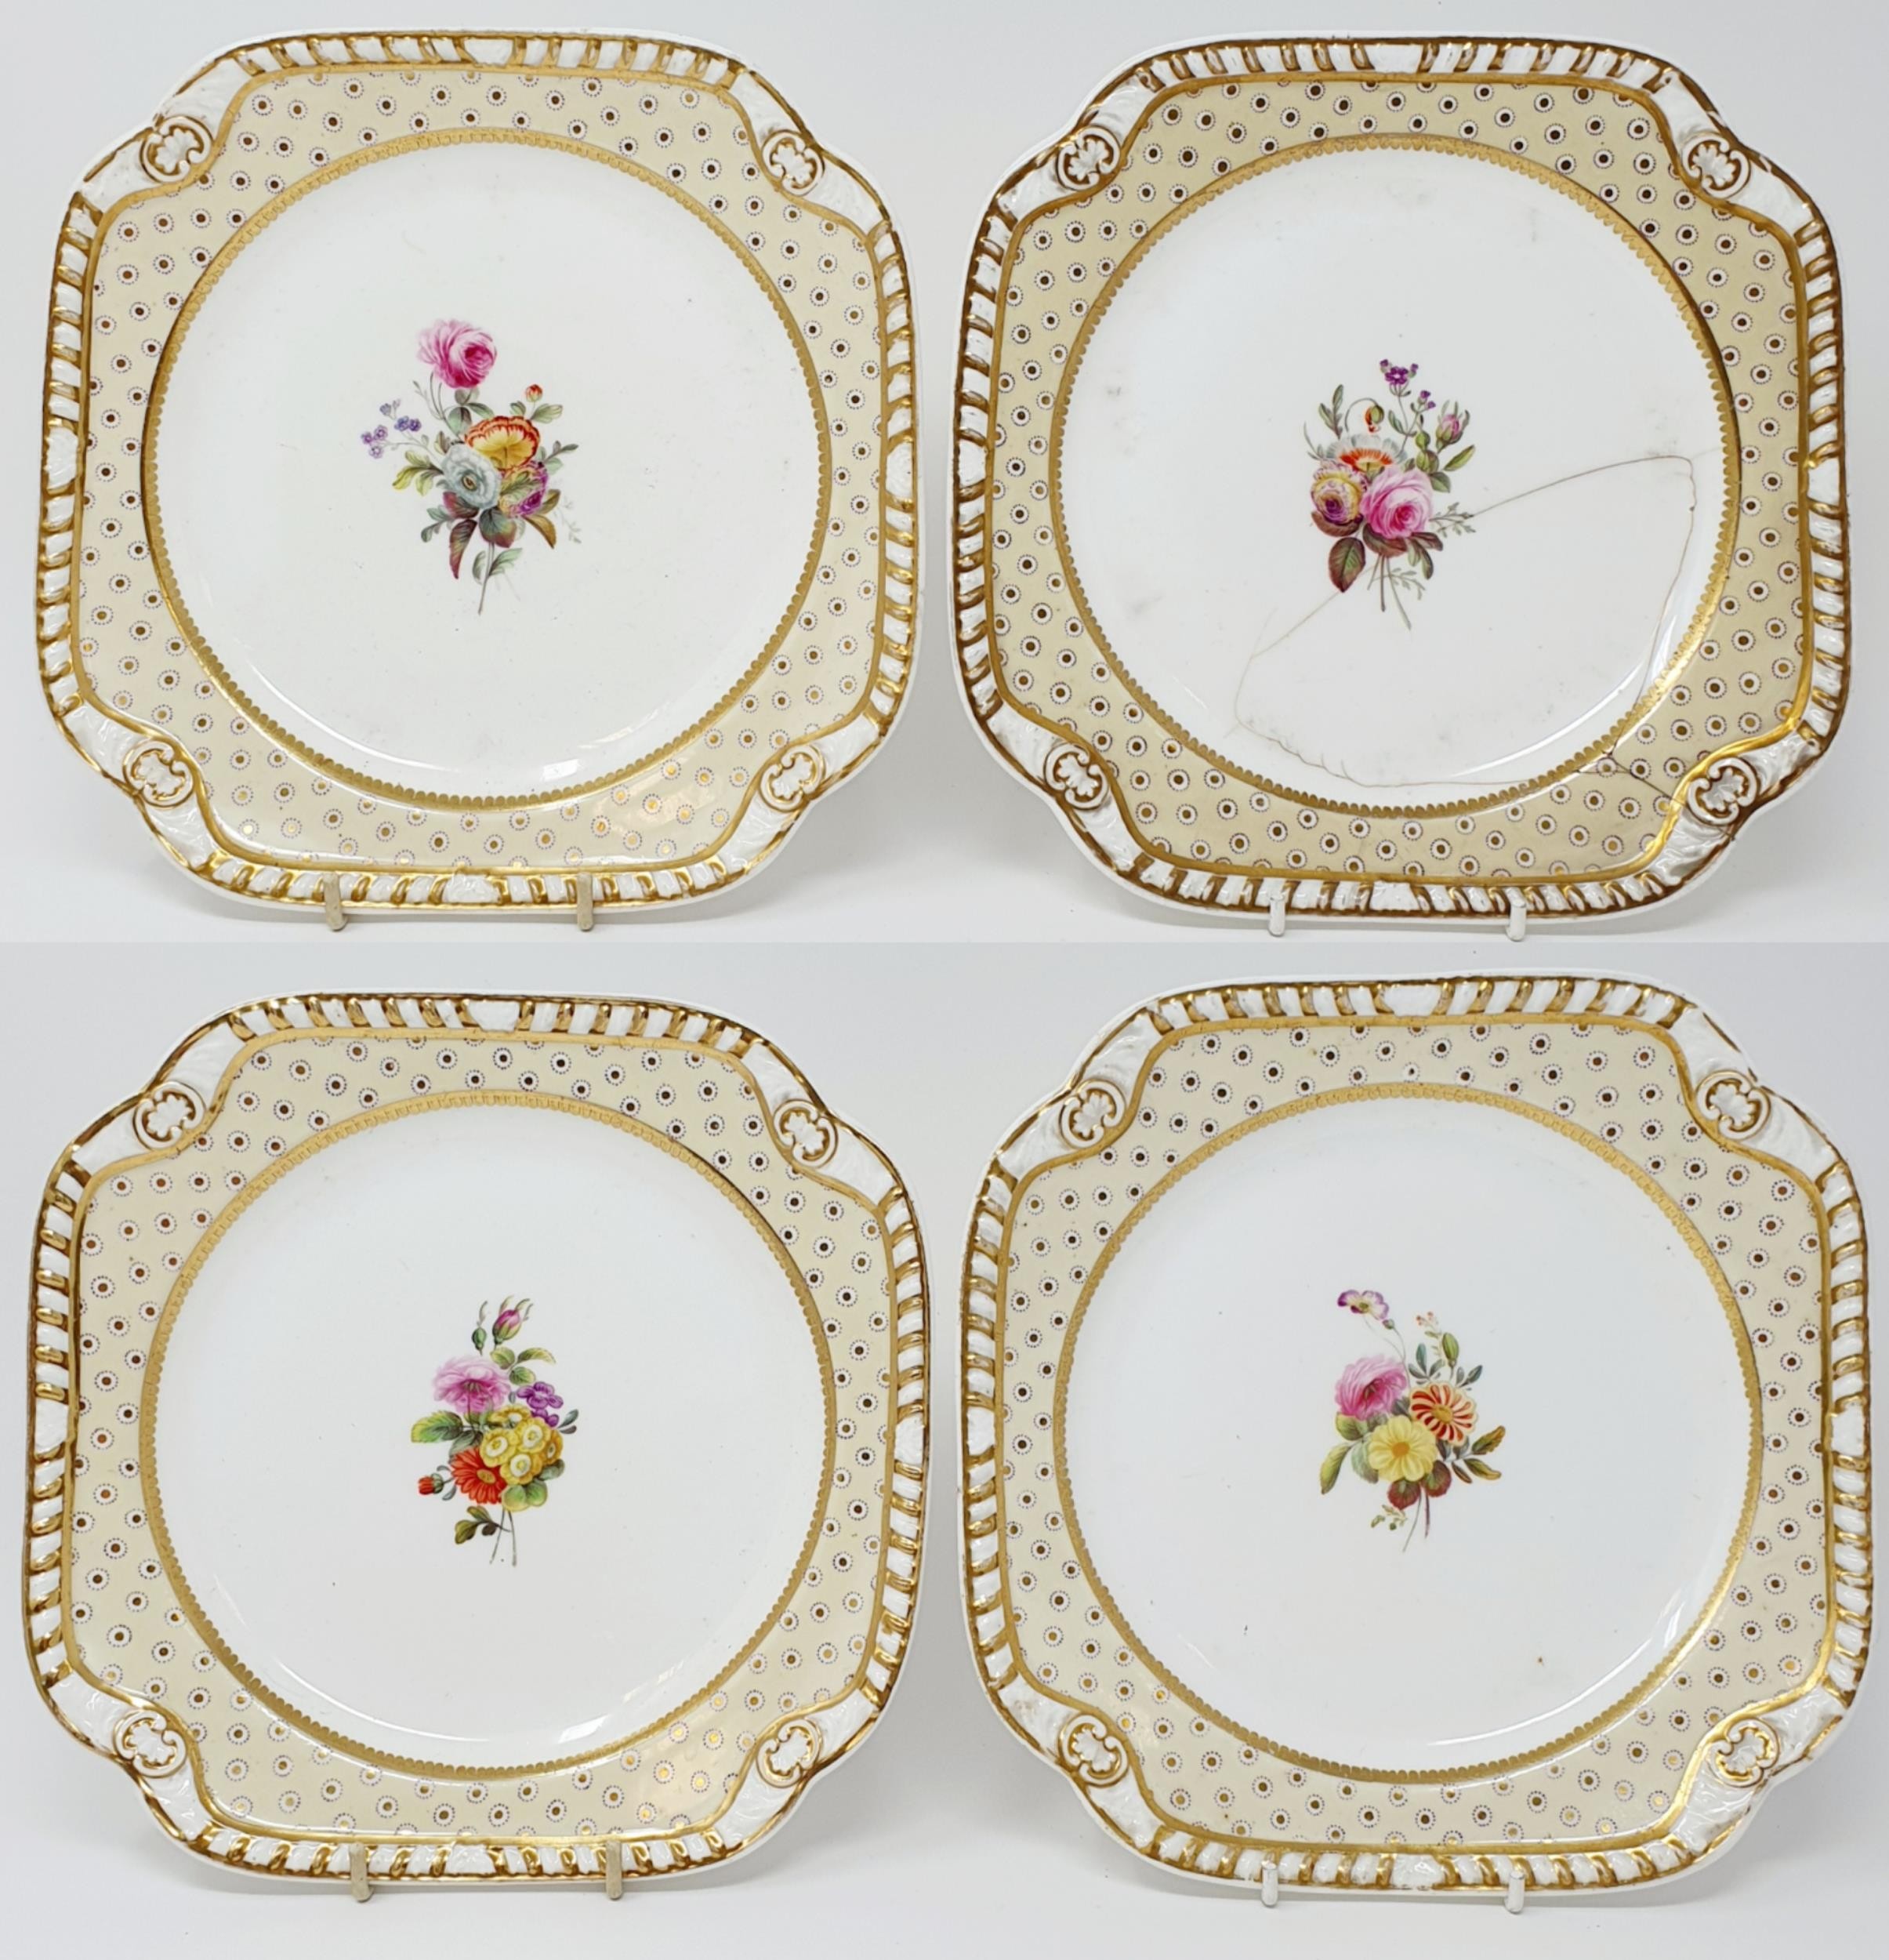 A 19th century Spode part dessert service, with a yellow border, centre decorated flowers, - Image 7 of 9